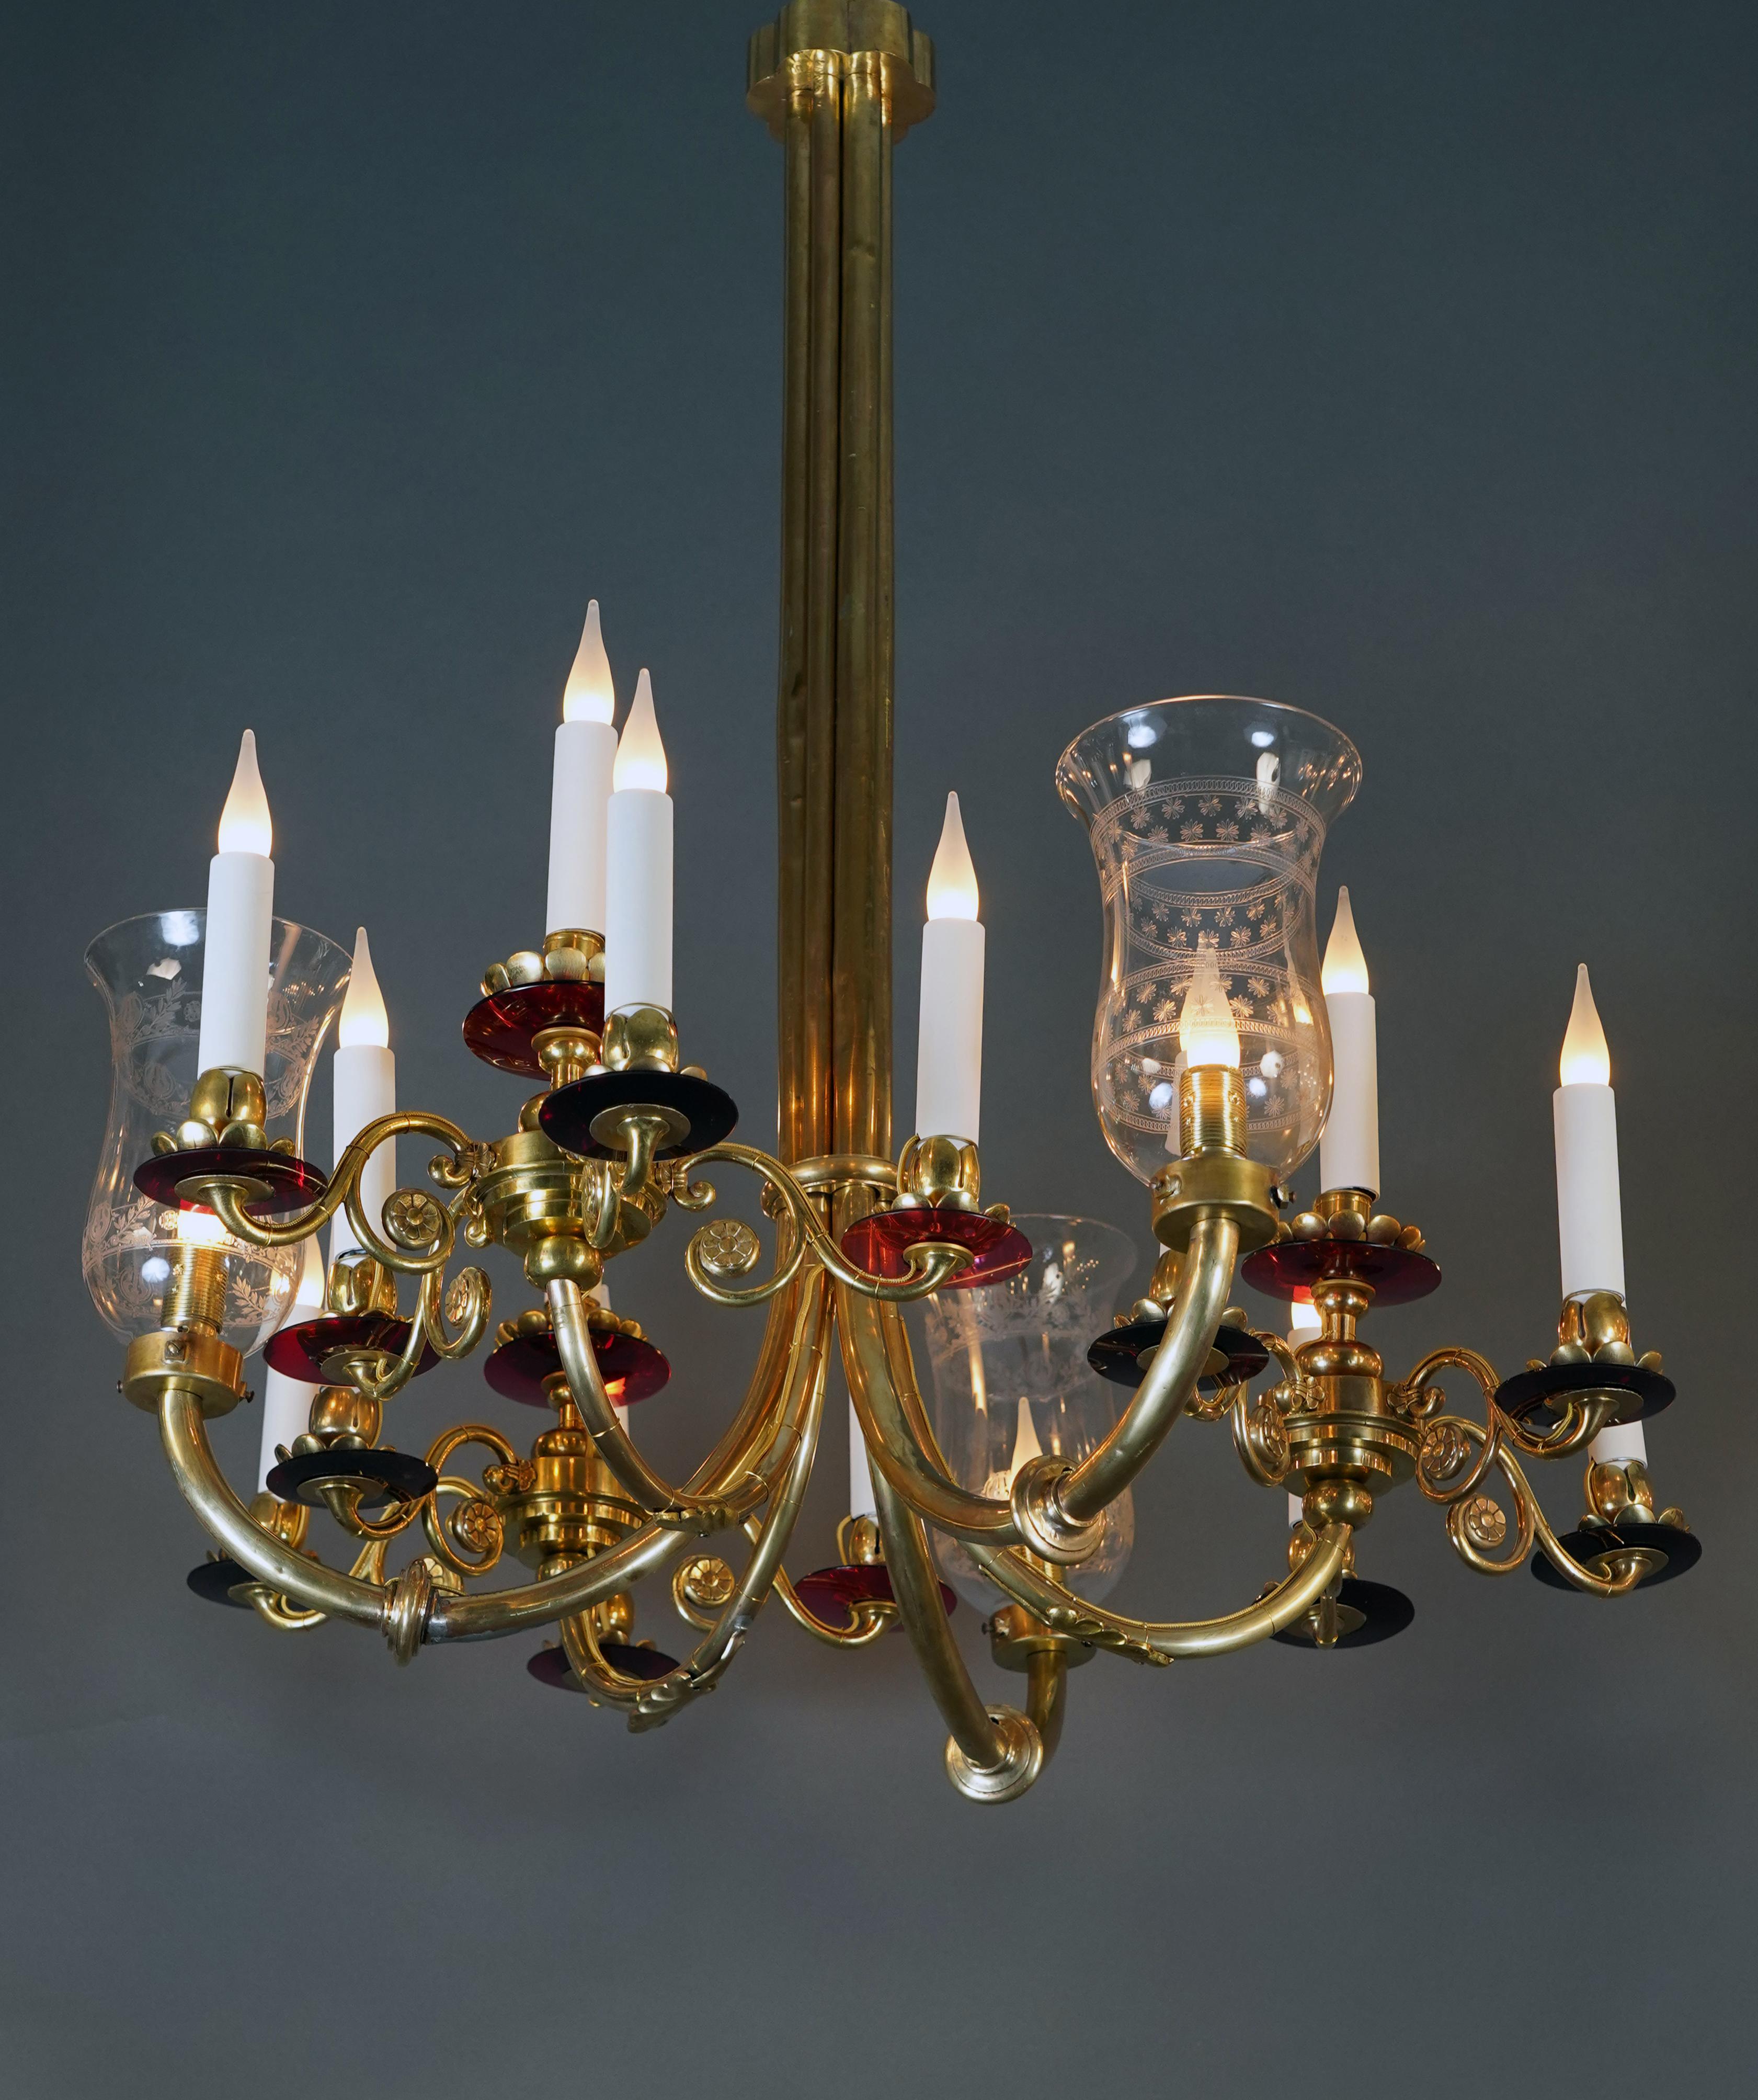 Elegant pair of brass and glass chandeliers whose shafts are formed by the extensions of six light arms joined together in ringed columns.
The light arms, with their curved lines underlined by stylized flowers and palms, end in red glass circles